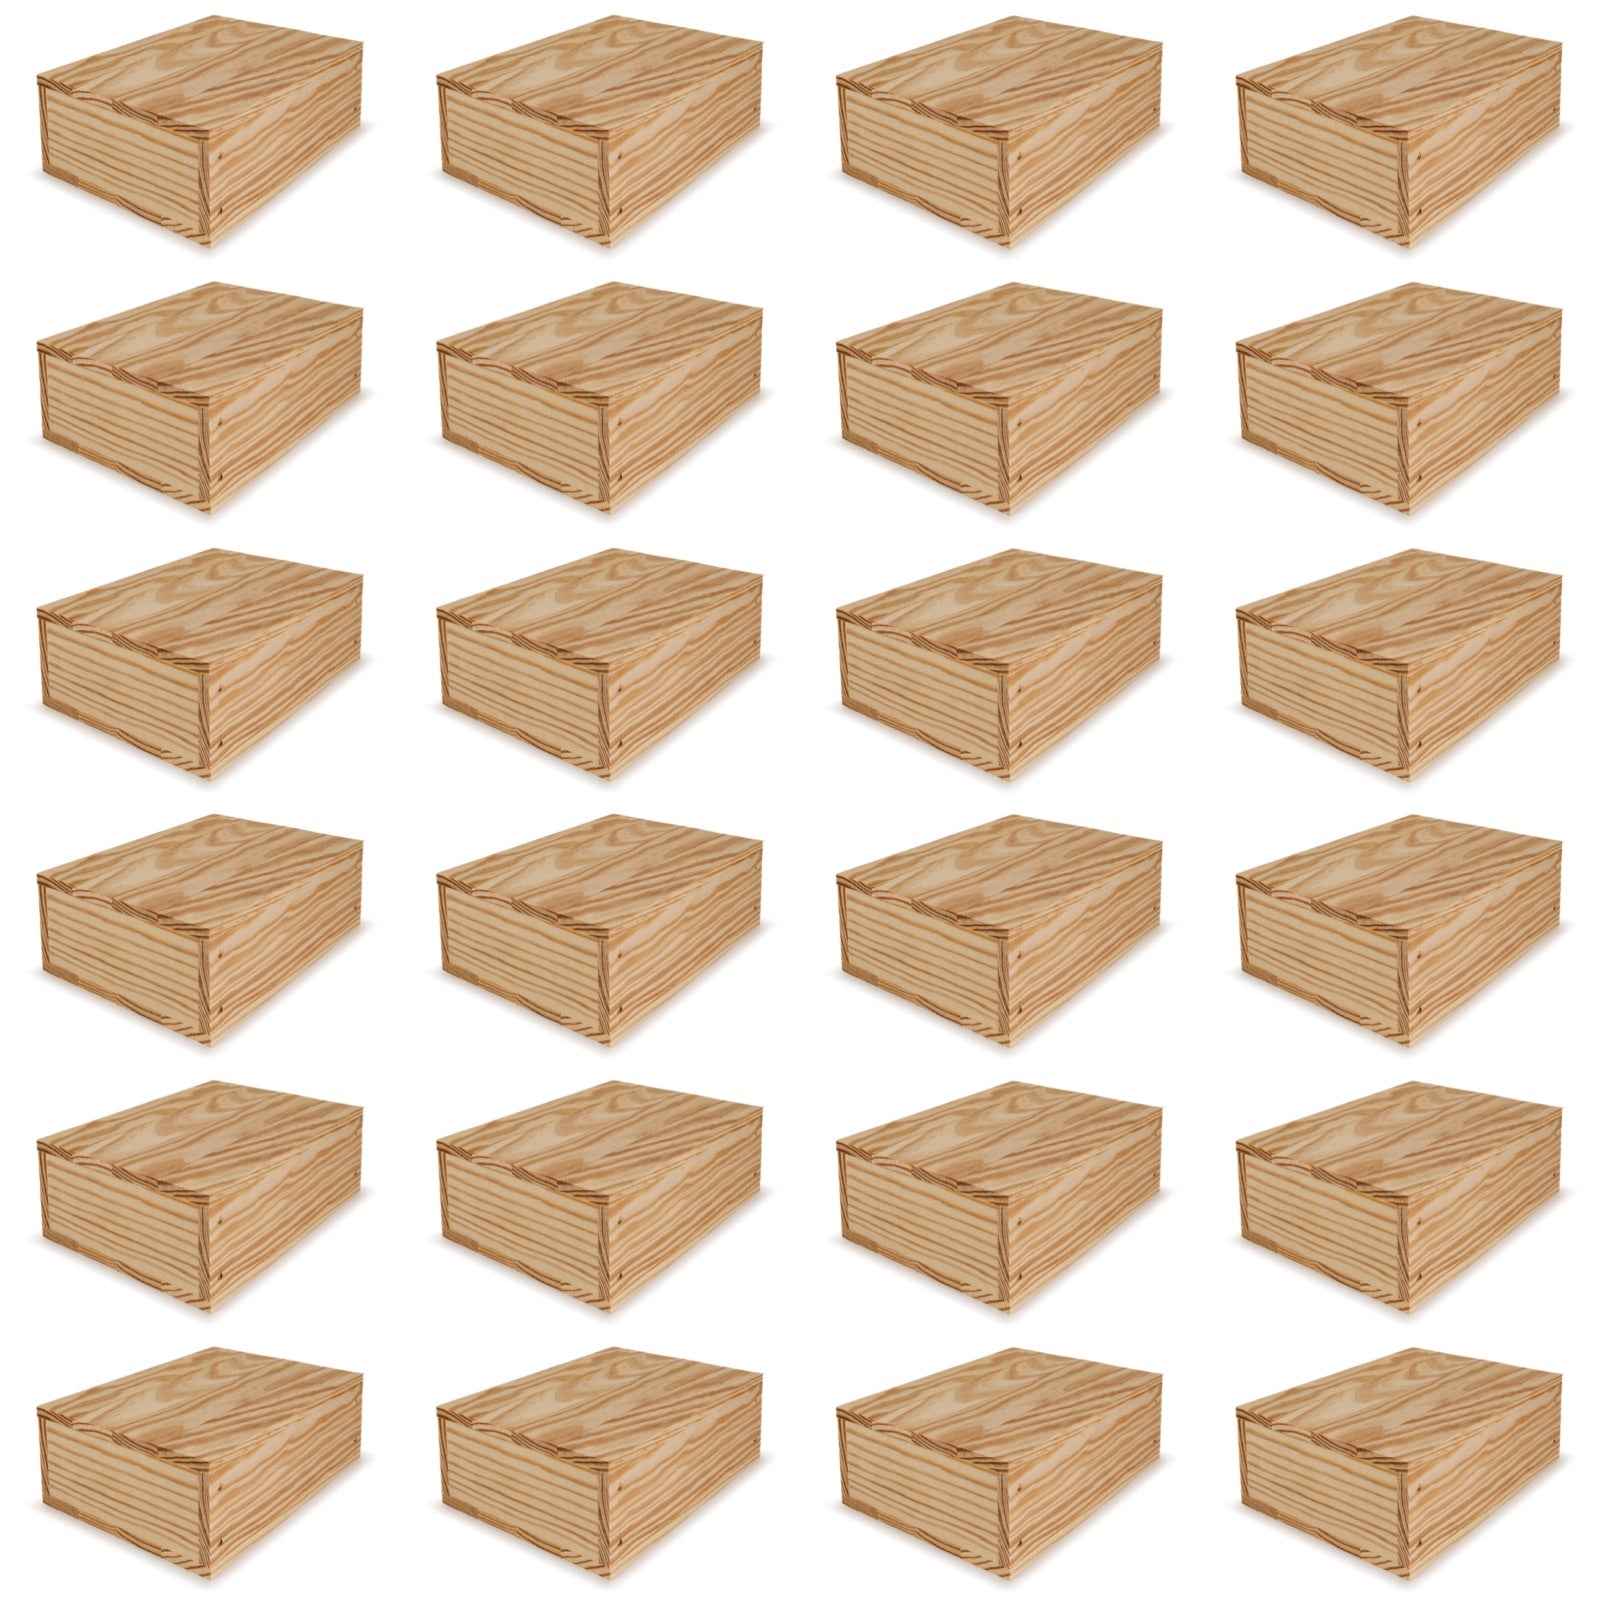 24 Small wooden crates with lid 8x6.25x2.75